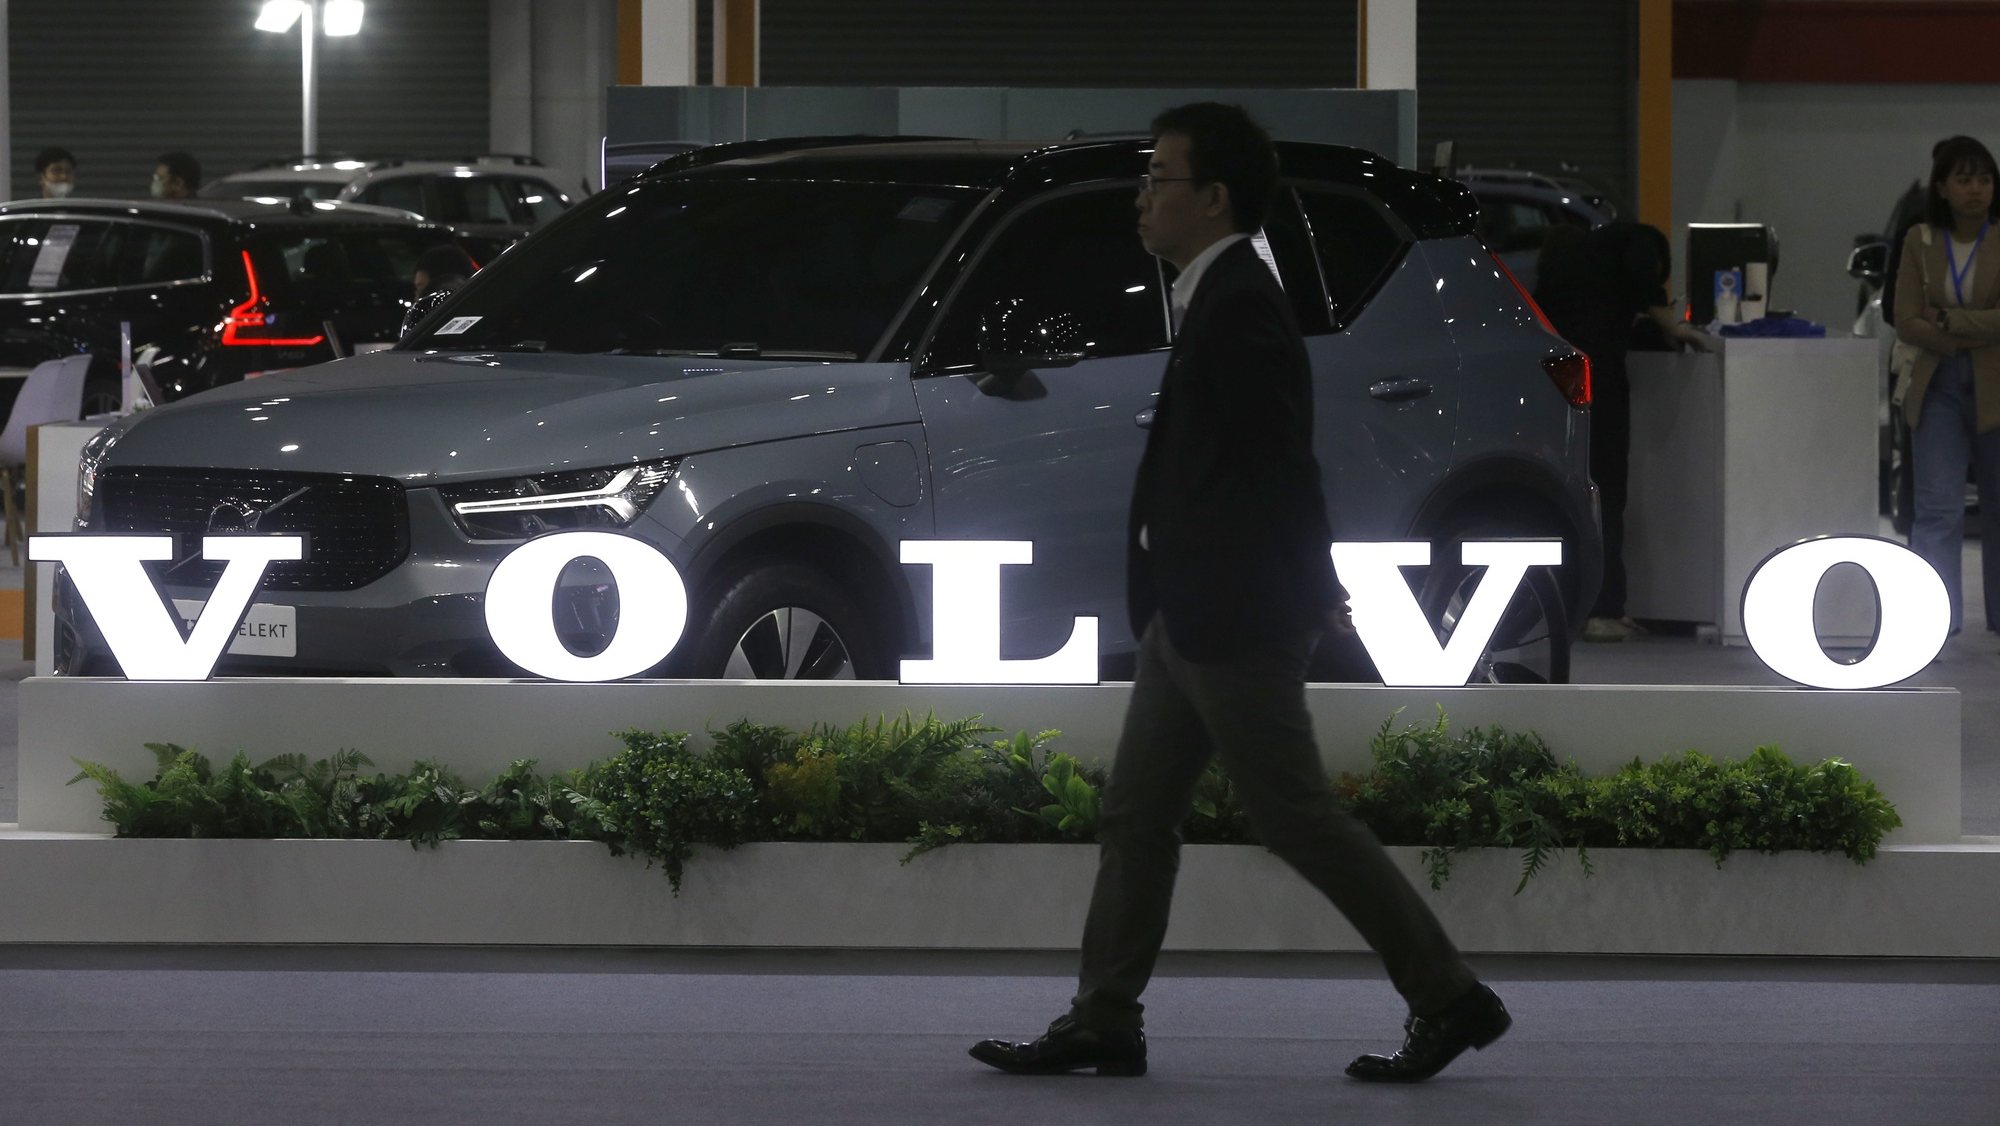 epa10727606 A visitor walks past the Volvo logo at the Fast Auto Show Thailand and EV Expo 2023 trade show at BITEC in Bangkok, Thailand, 05 July 2023. The event is held between 05 and 09 July and will include displaying EV innovations such as energy storage system by Nuovo Plus, PTT EV Charger electric charging station and a simulated EV Station Pluz charging station. According to the Federation of Thai Industries, more than 16,400 new EV cars were registered in the country in March 2023.  EPA/NARONG SANGNAK